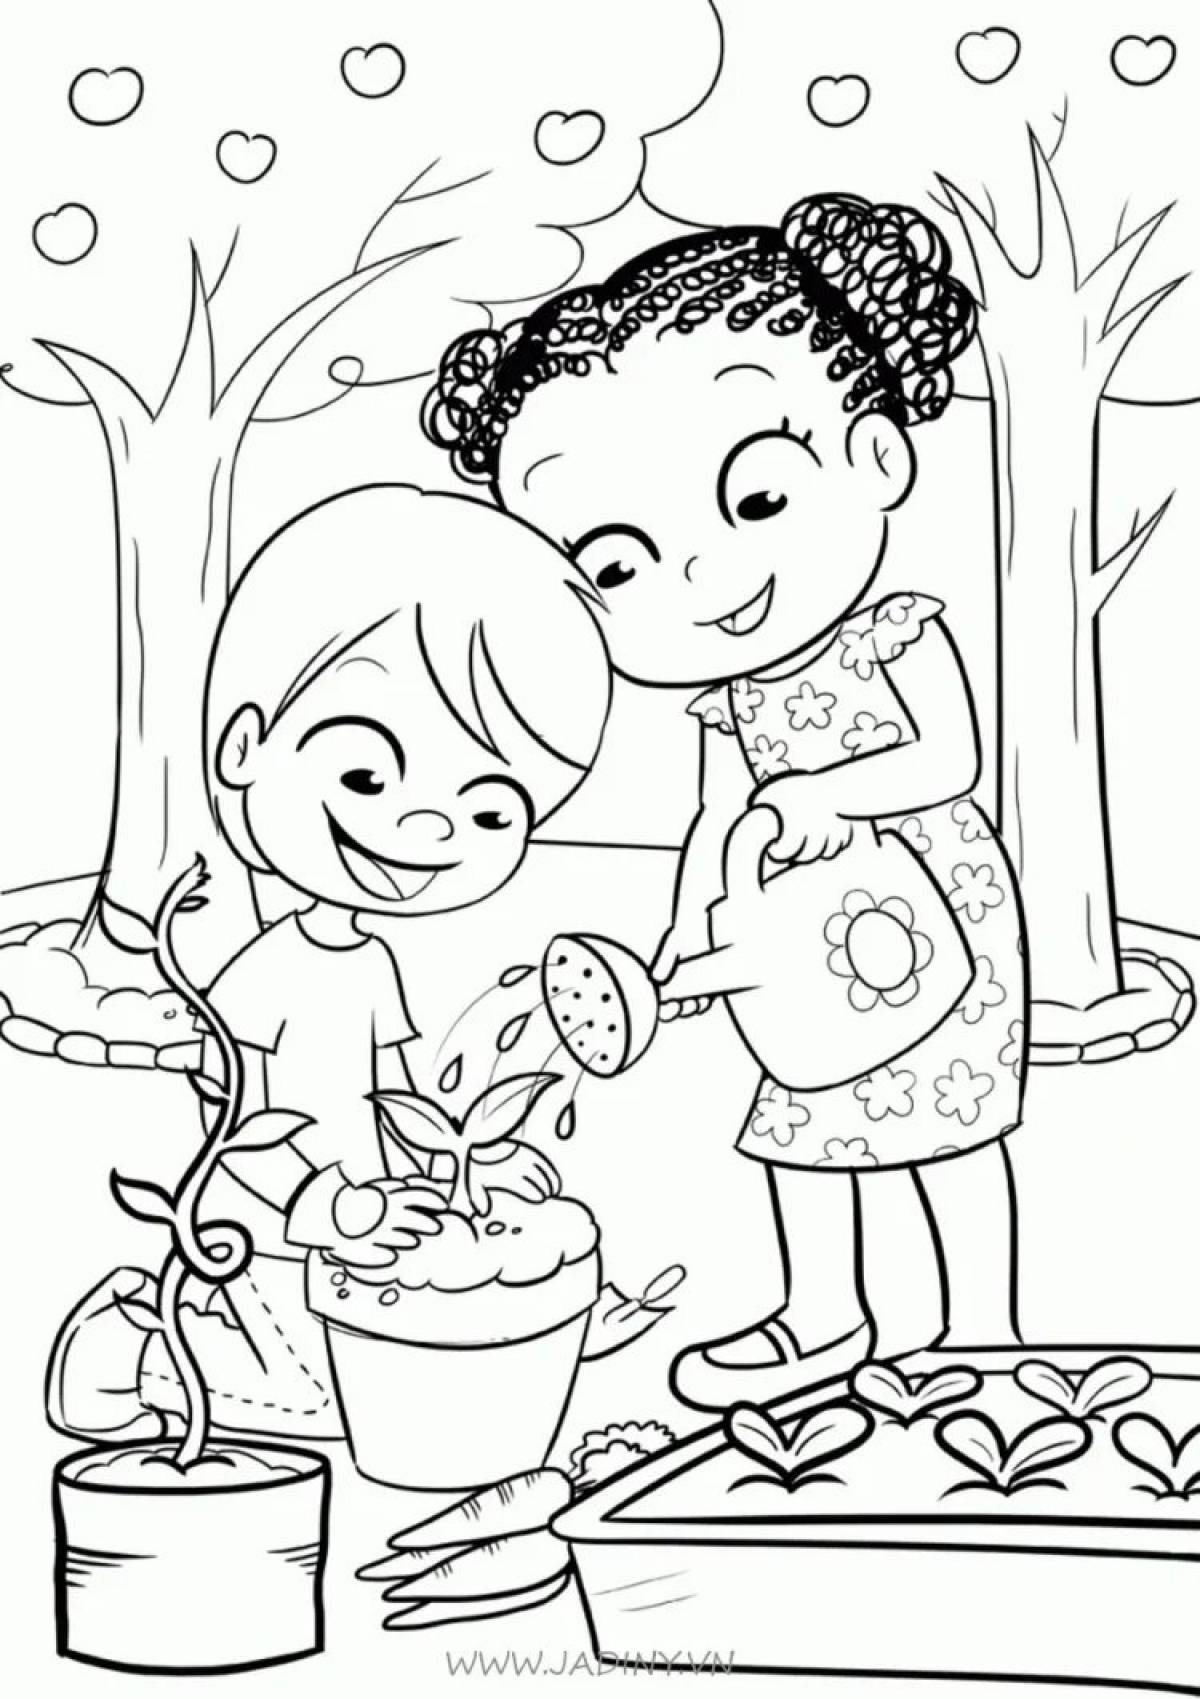 Colored garden coloring book for kids